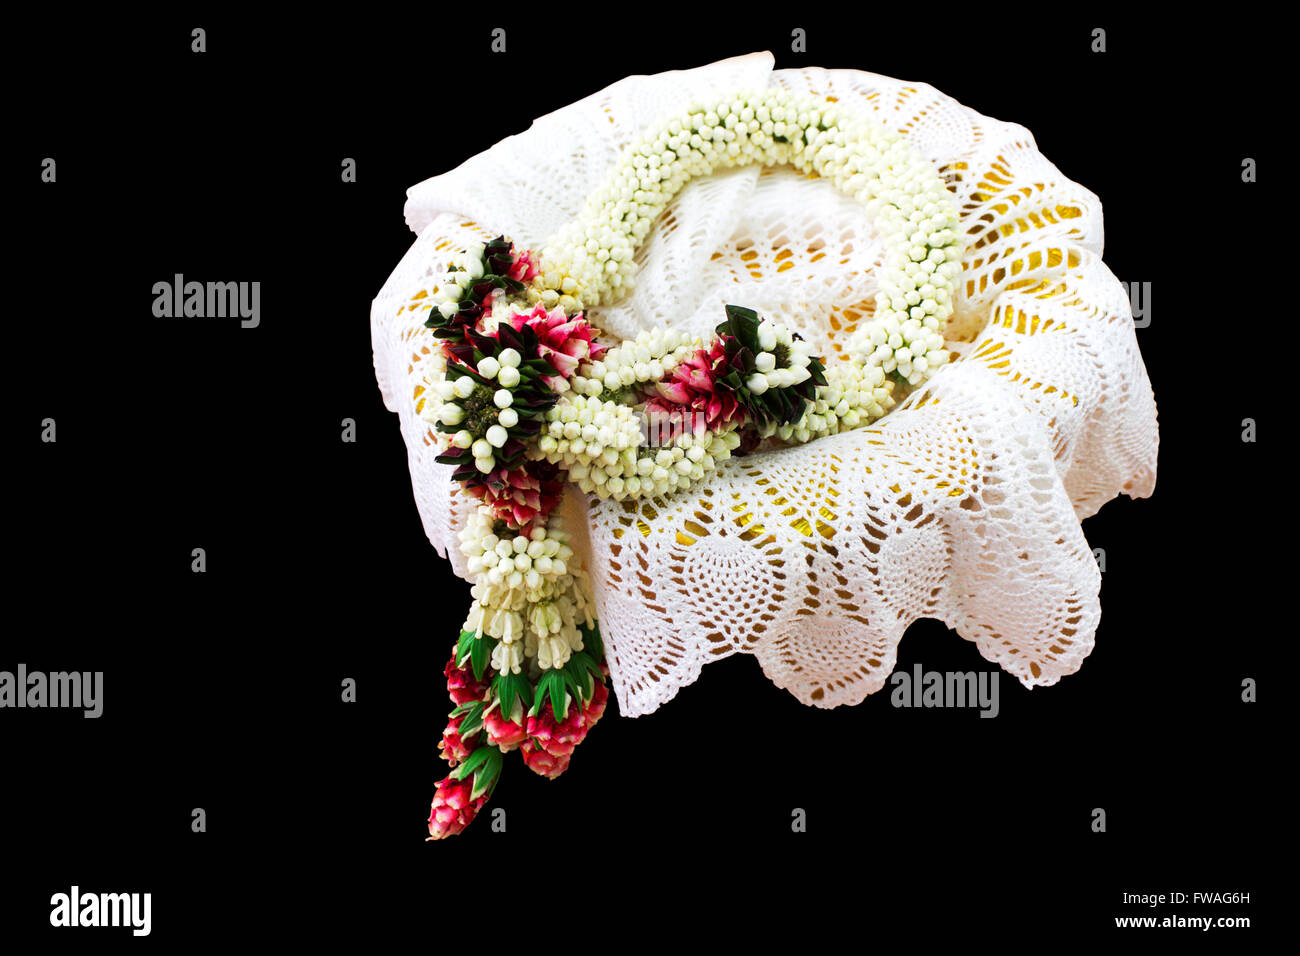 Jasmine garland at lace cloth enter phan on isolated back background with clipping path Stock Photo